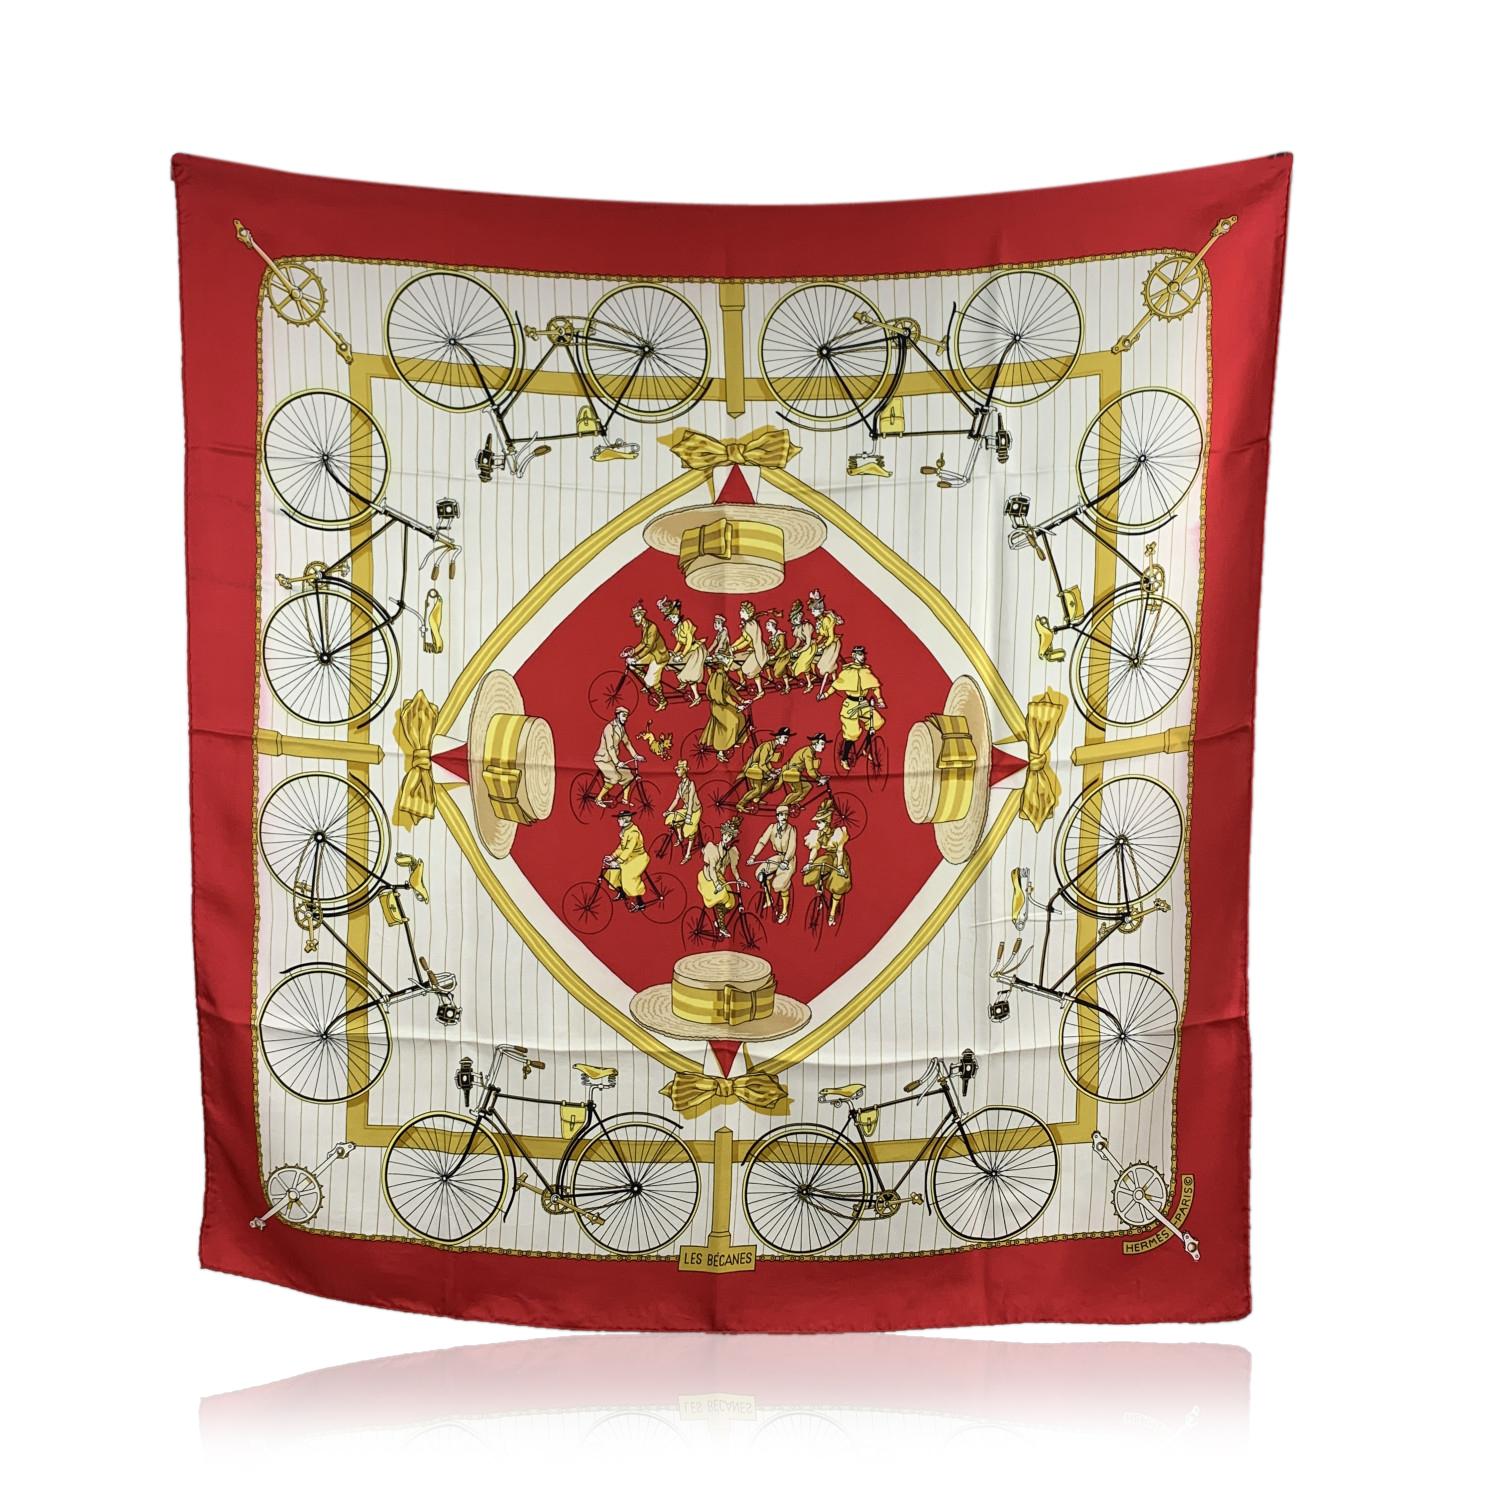 HERMES scarf 'Les Becanes' by Hugo Grygkar and originally issued in 1954 (reissued in 1973, 1990 and again in 2003). This design depicts bicycles, boater hats, and men and women. Red borders. 100% silk, hand rolled hem, made in France. No